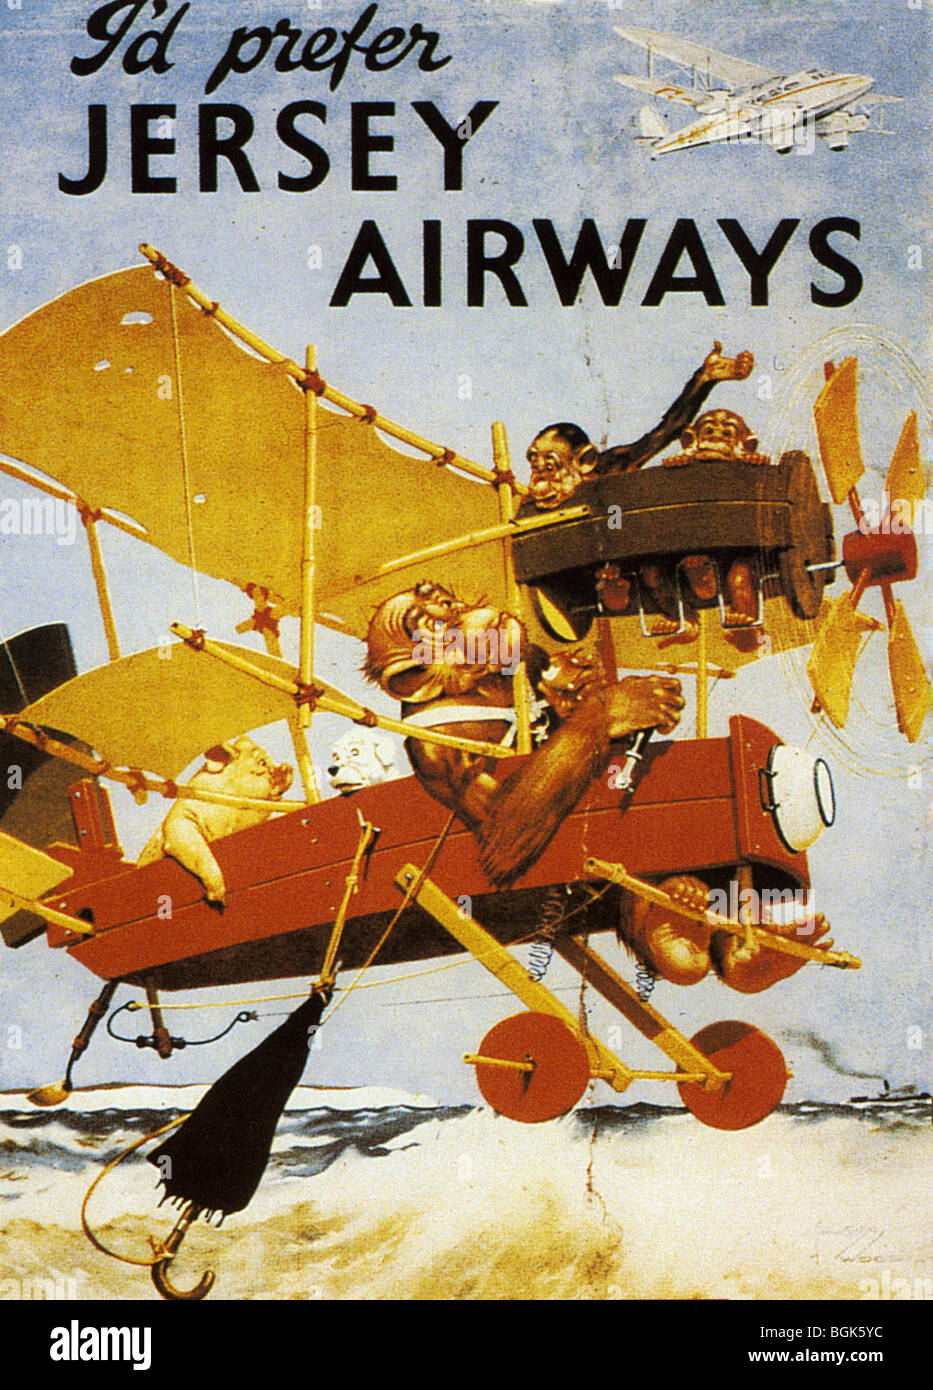 JERSEY AIRWAYS advert about 1930 Stock Photo